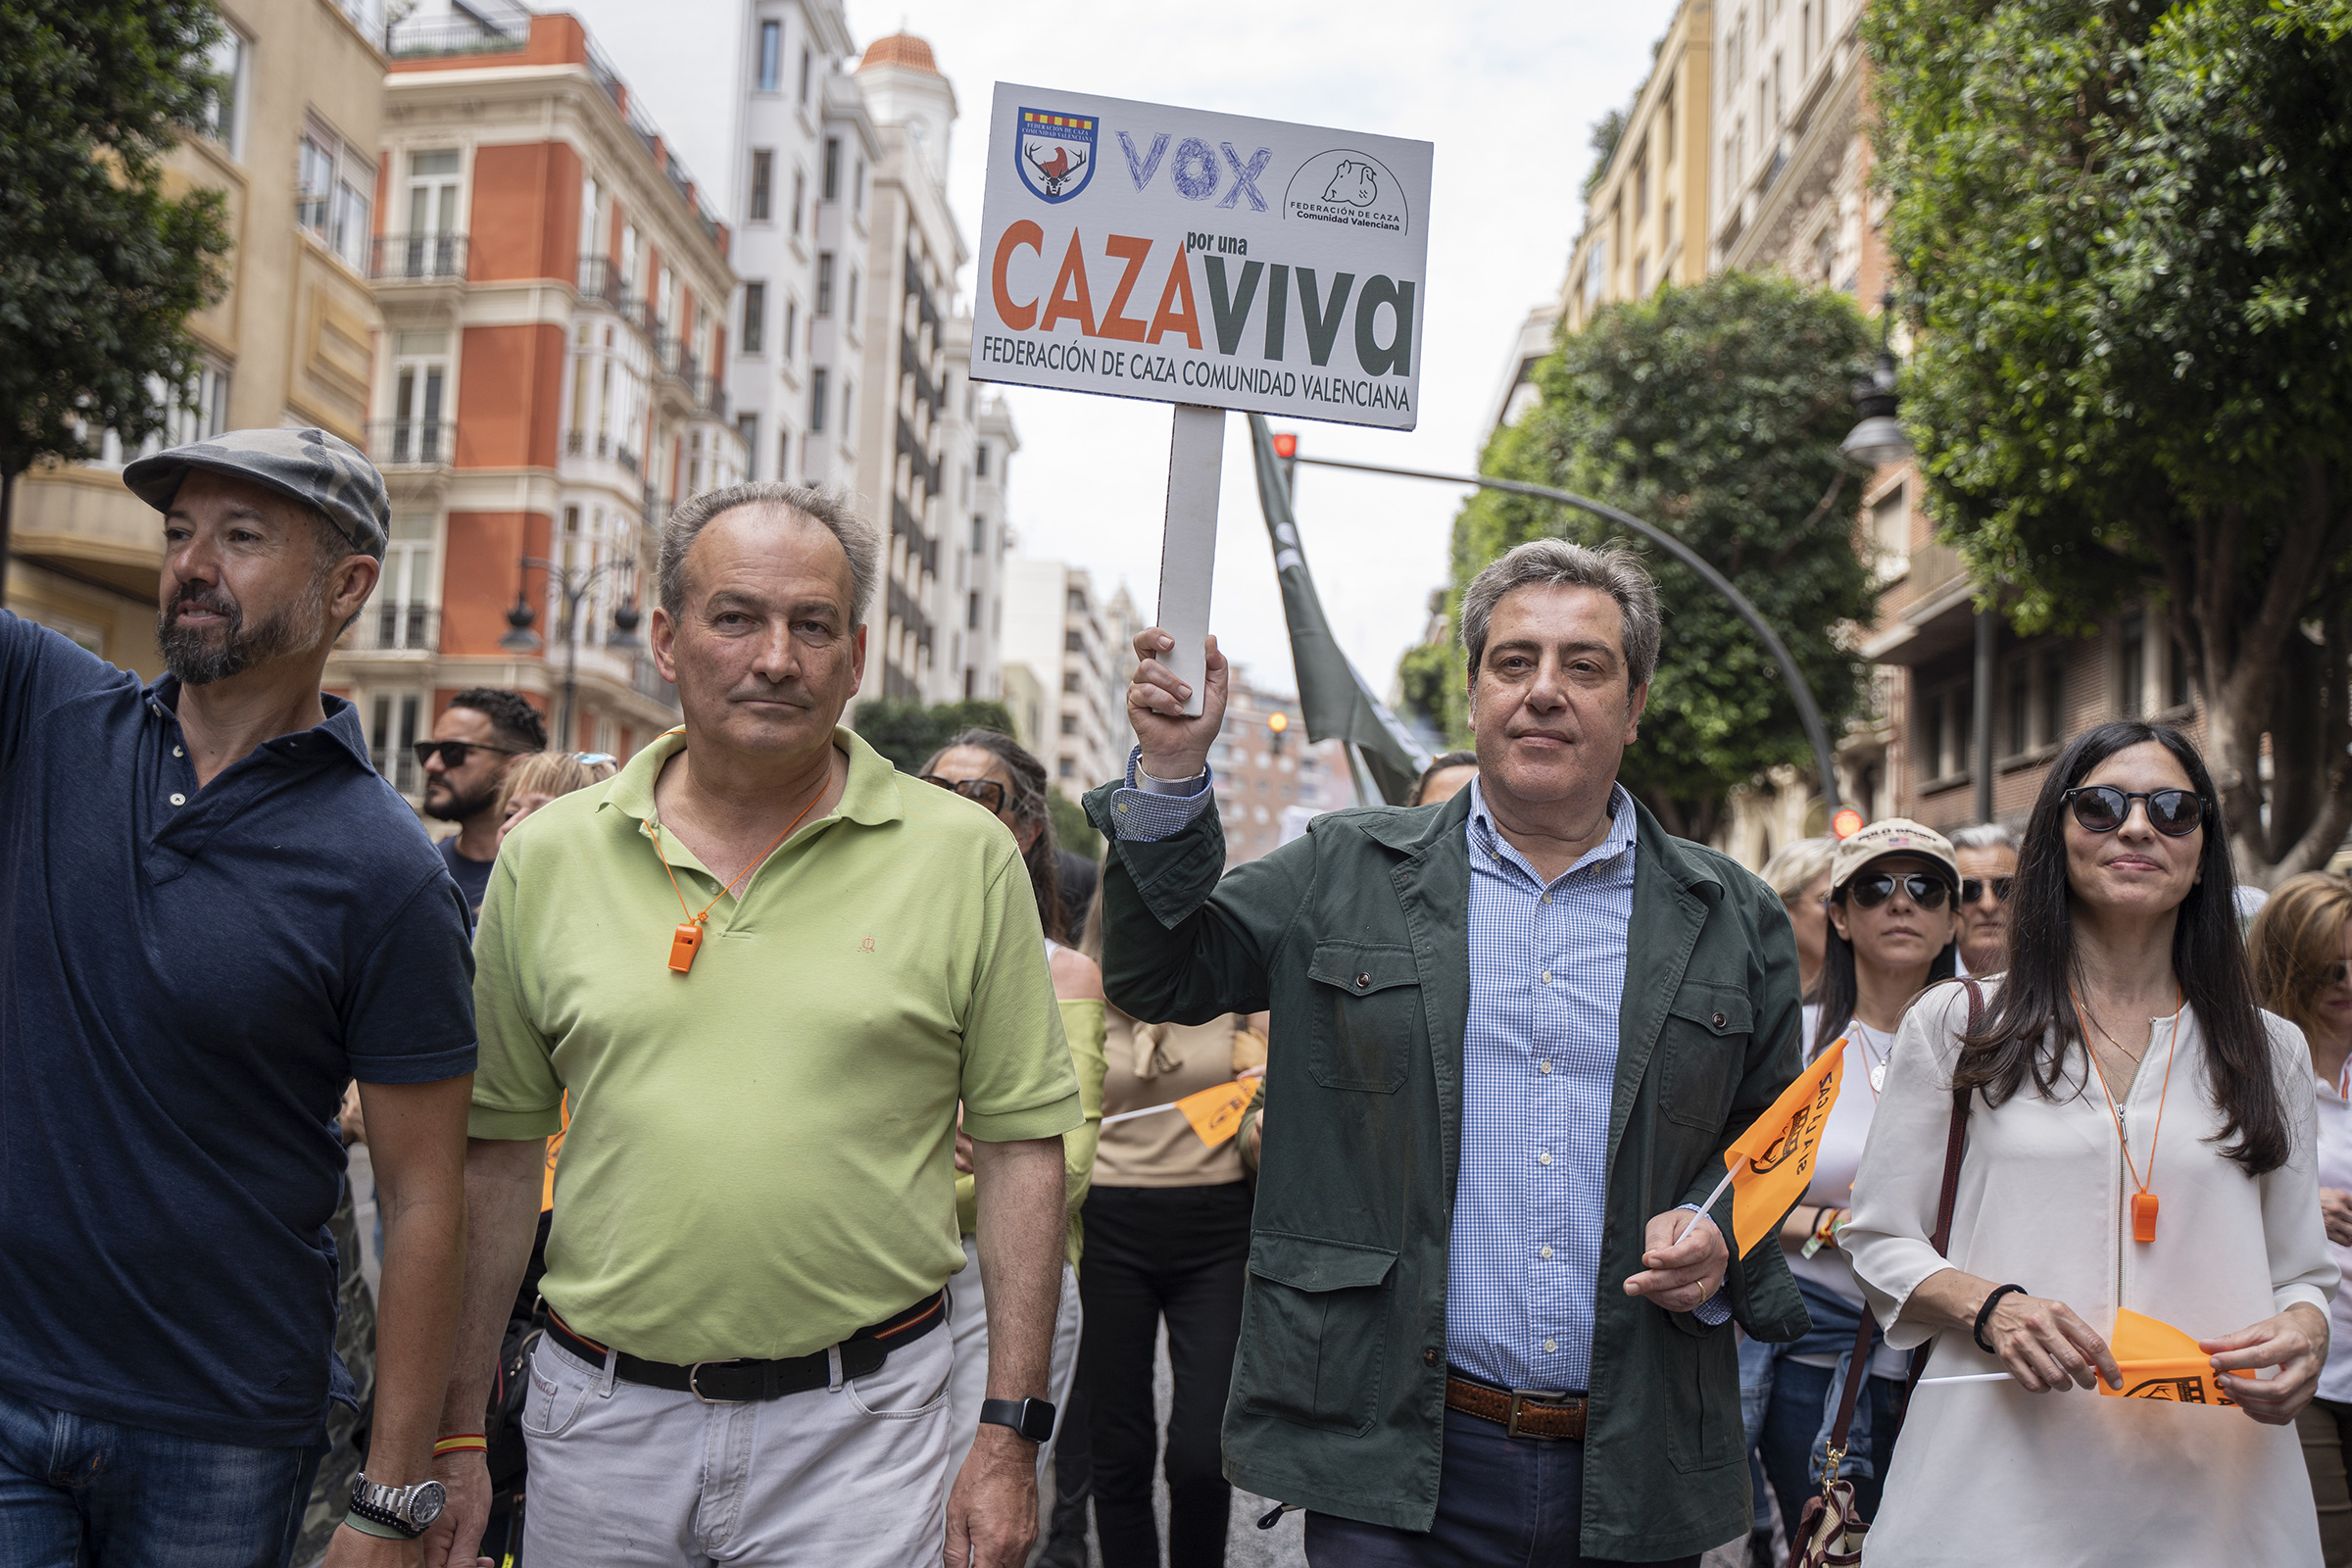 The deputy spokesman of Vox, José María Llanos (second from right), in Valencia, Spain, on May 6, 2023. (Jorge Gil—Europa Press/AP)